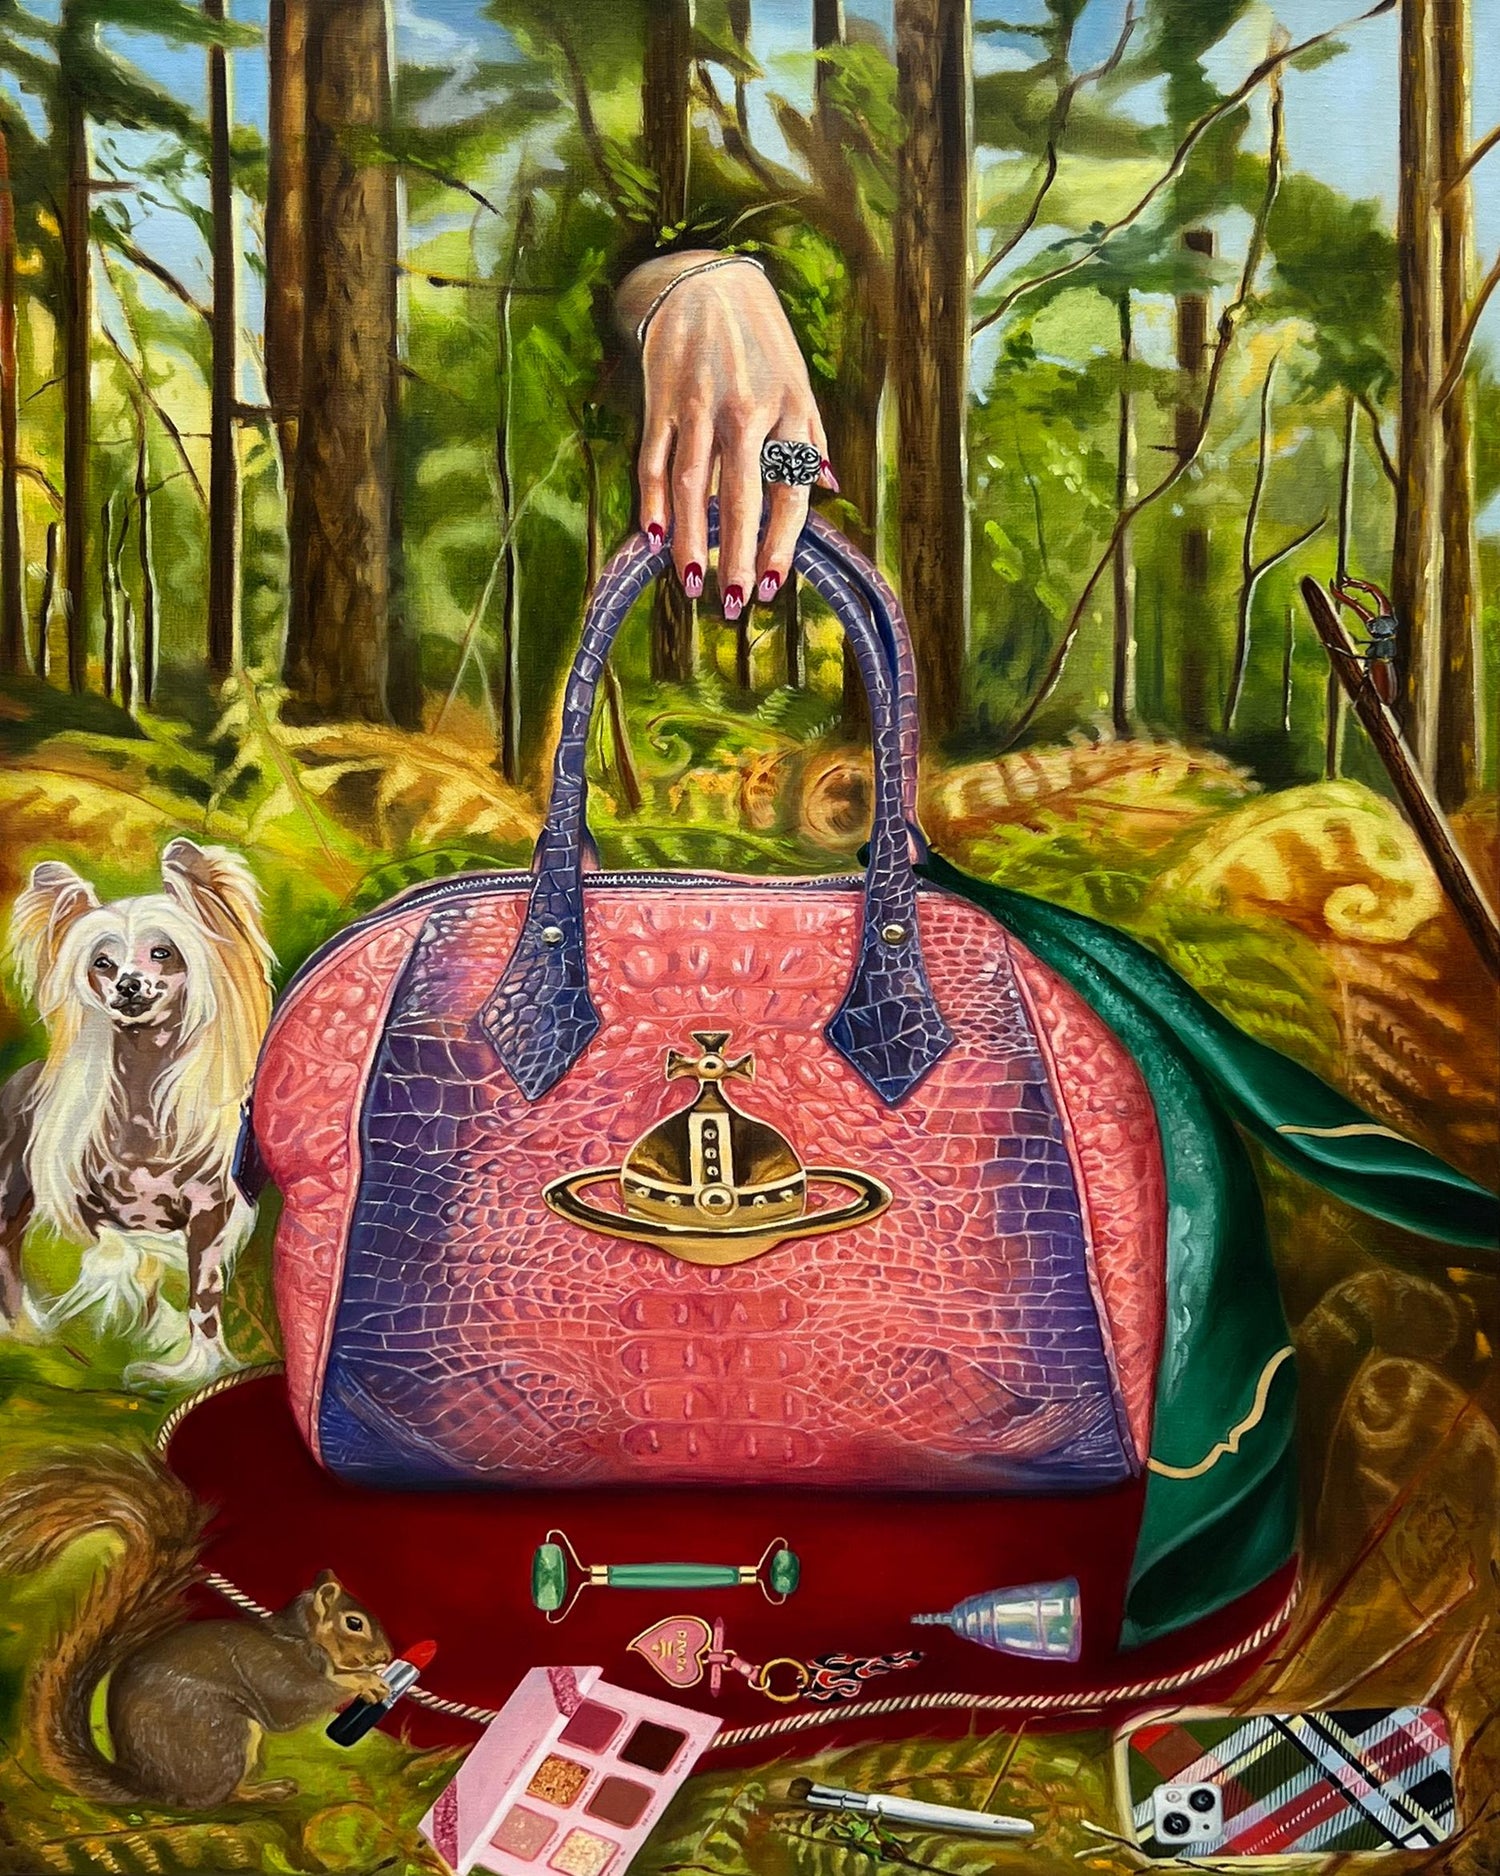 Nice Drip: Louis Vuitton Launches $4,100 Paint Can Bag